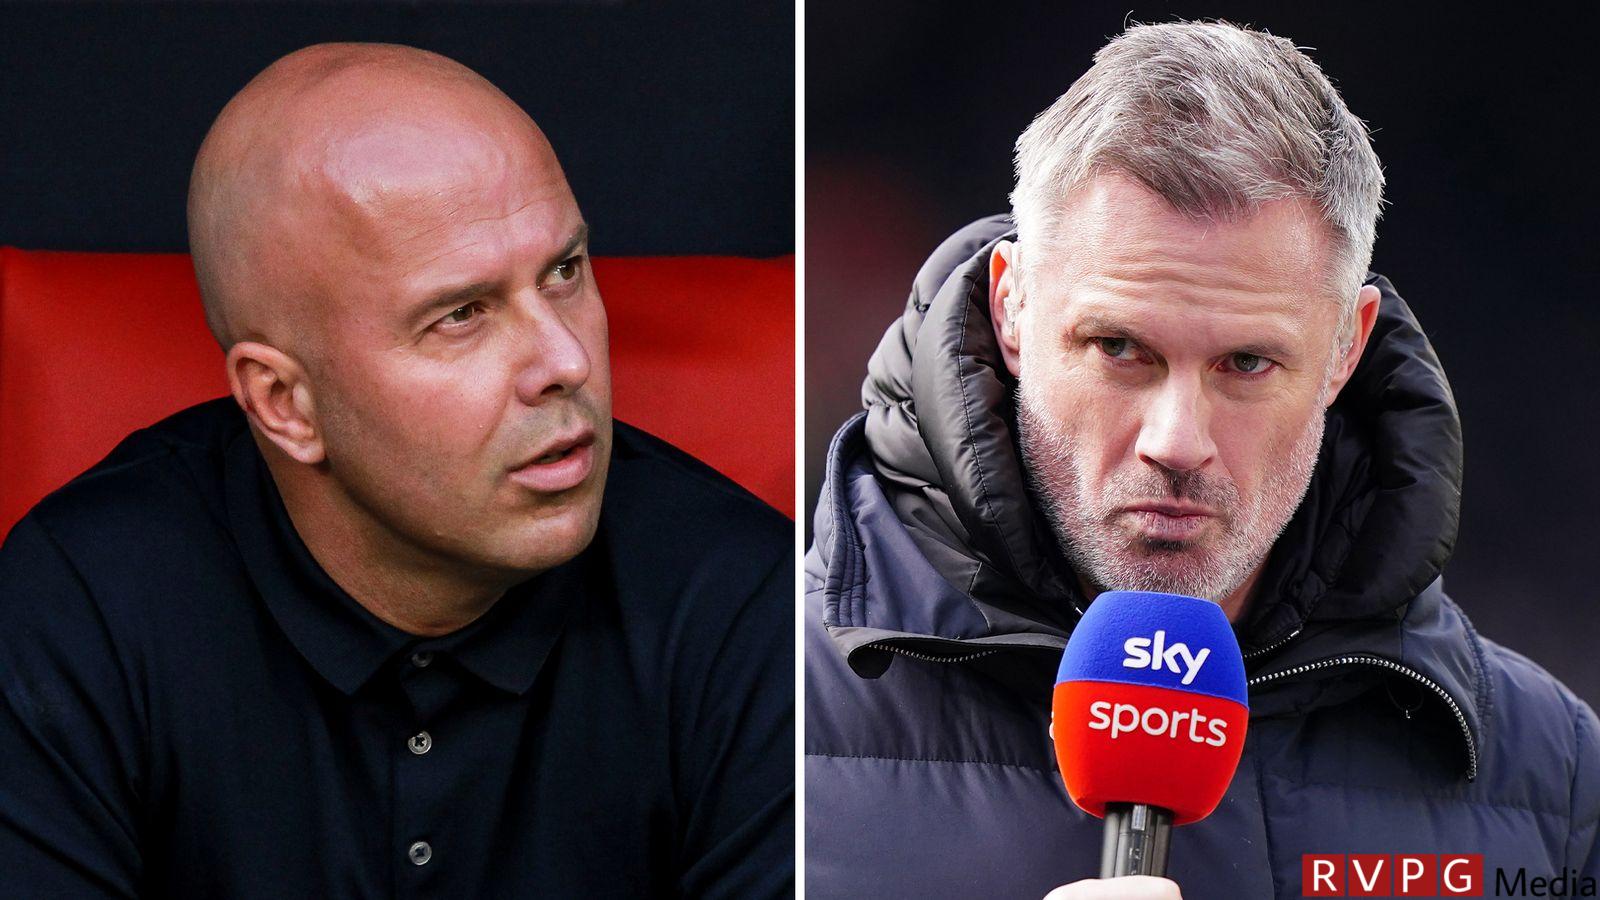 Liverpool's move for Arne Slot from Feyenoord shows there is a shortage of "top managers", says Jamie Carragher